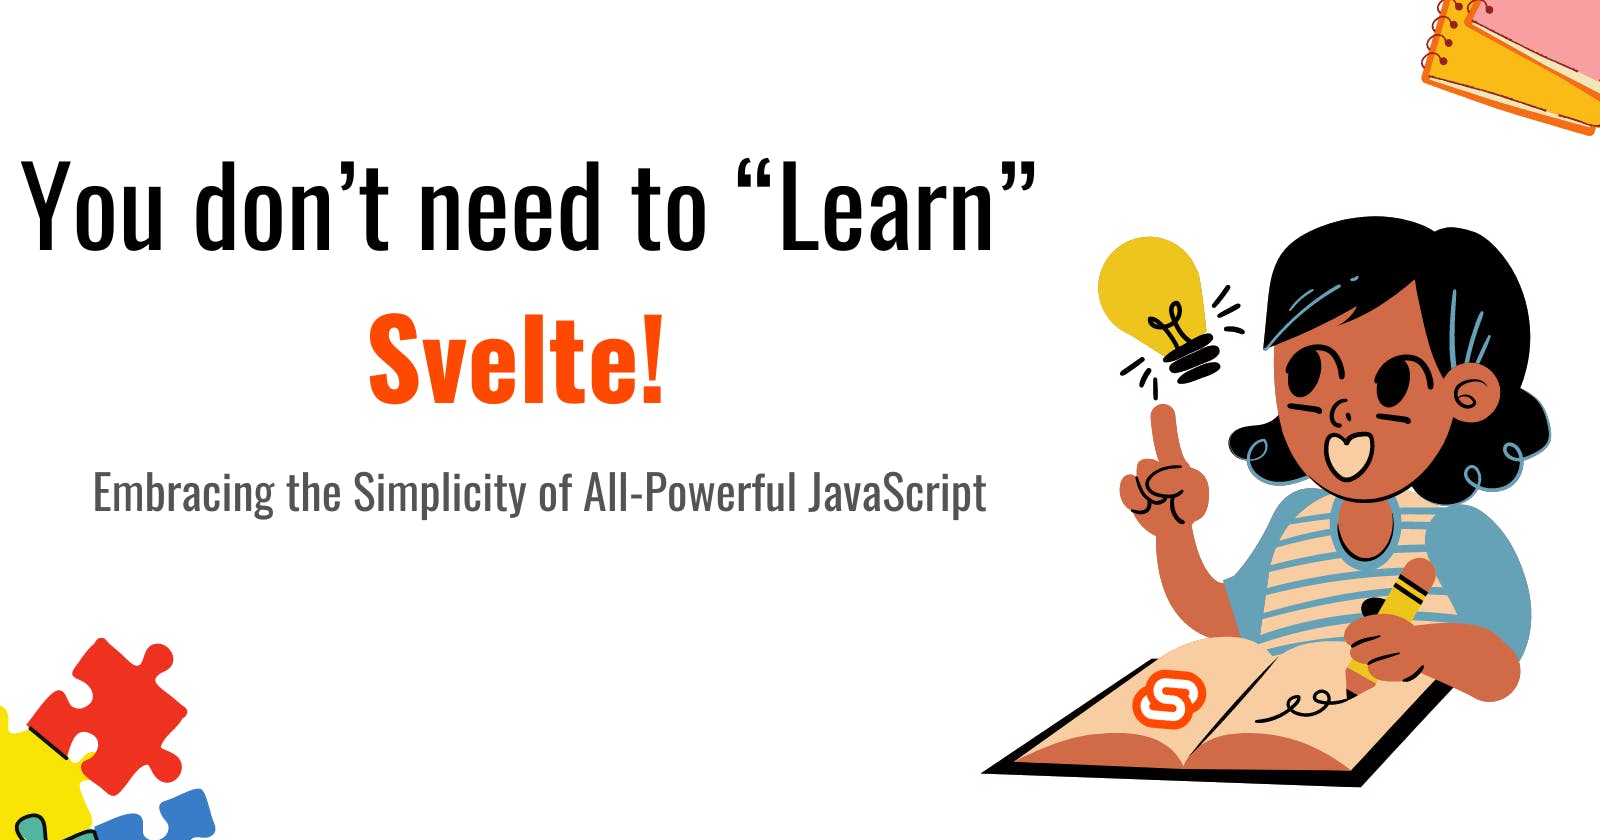 You Don't Need to "Learn" Svelte